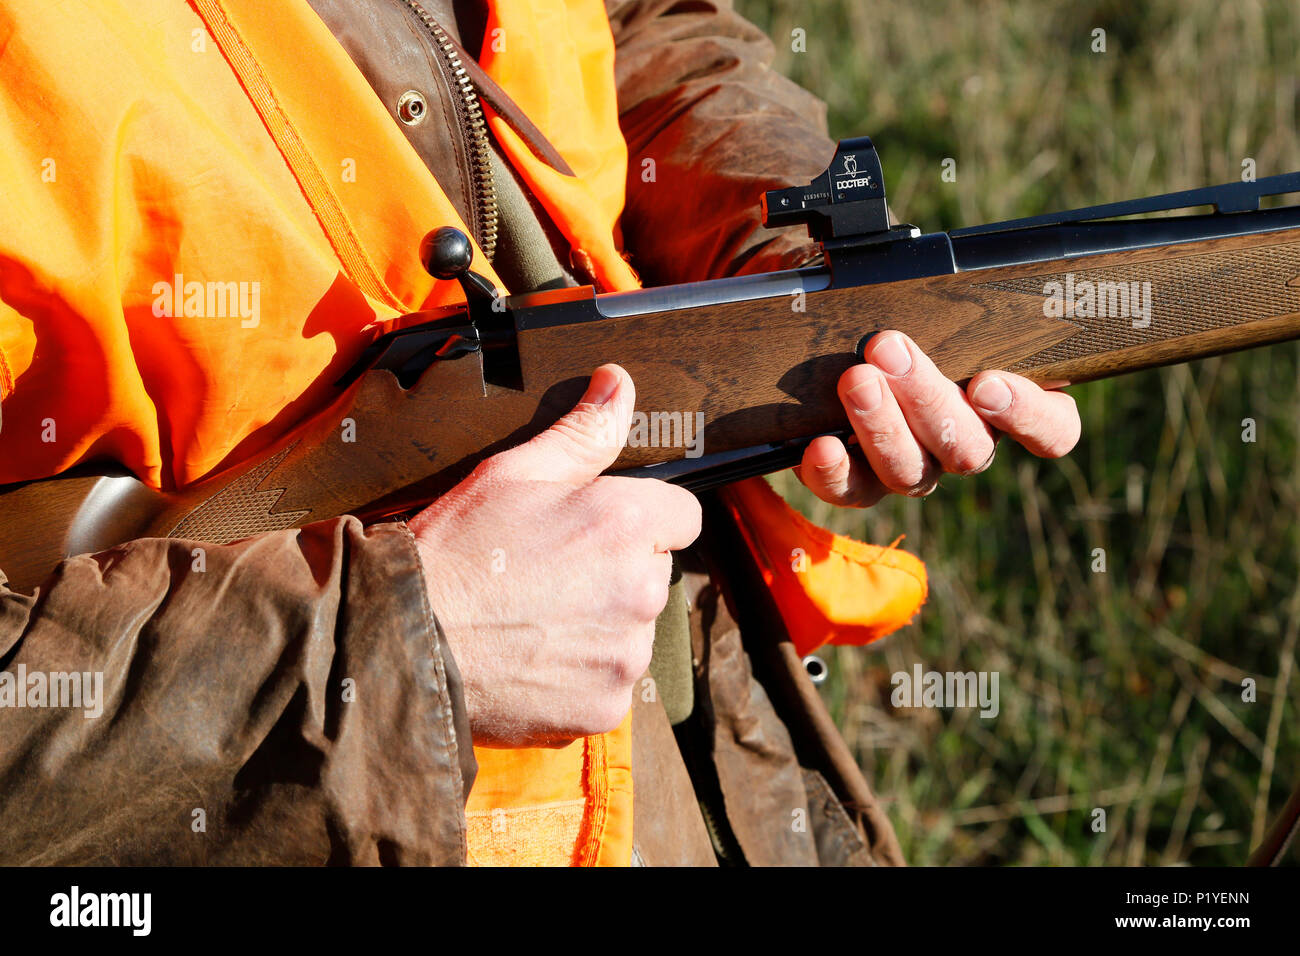 Department of Aisne. Big game hunting season (autumn). Hunter holding a rifle in his hands. Stock Photo